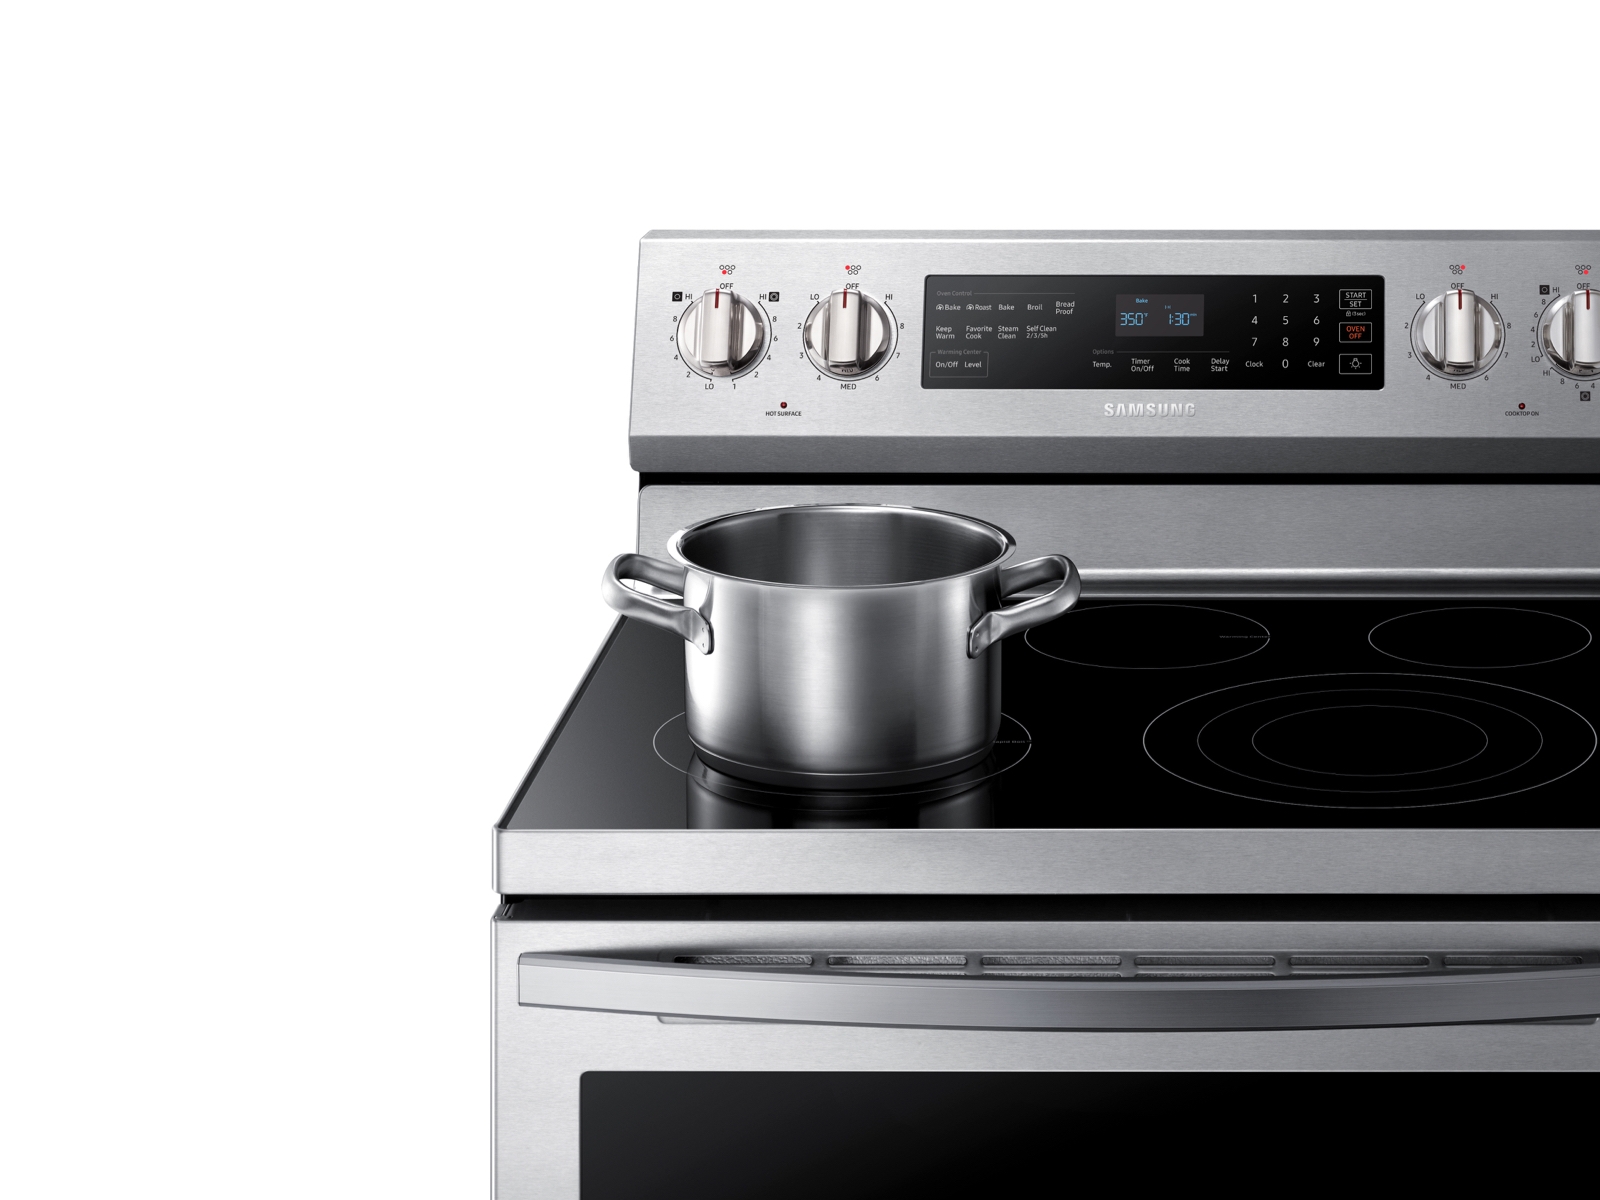 NE58R9431STSamsung 5.8 cu. ft. Slide-In Electric Range in Tuscan Stainless  Steel FINGERPRINT RESISTANT TUSCAN STAINLESS STEEL - Snow Brothers Appliance